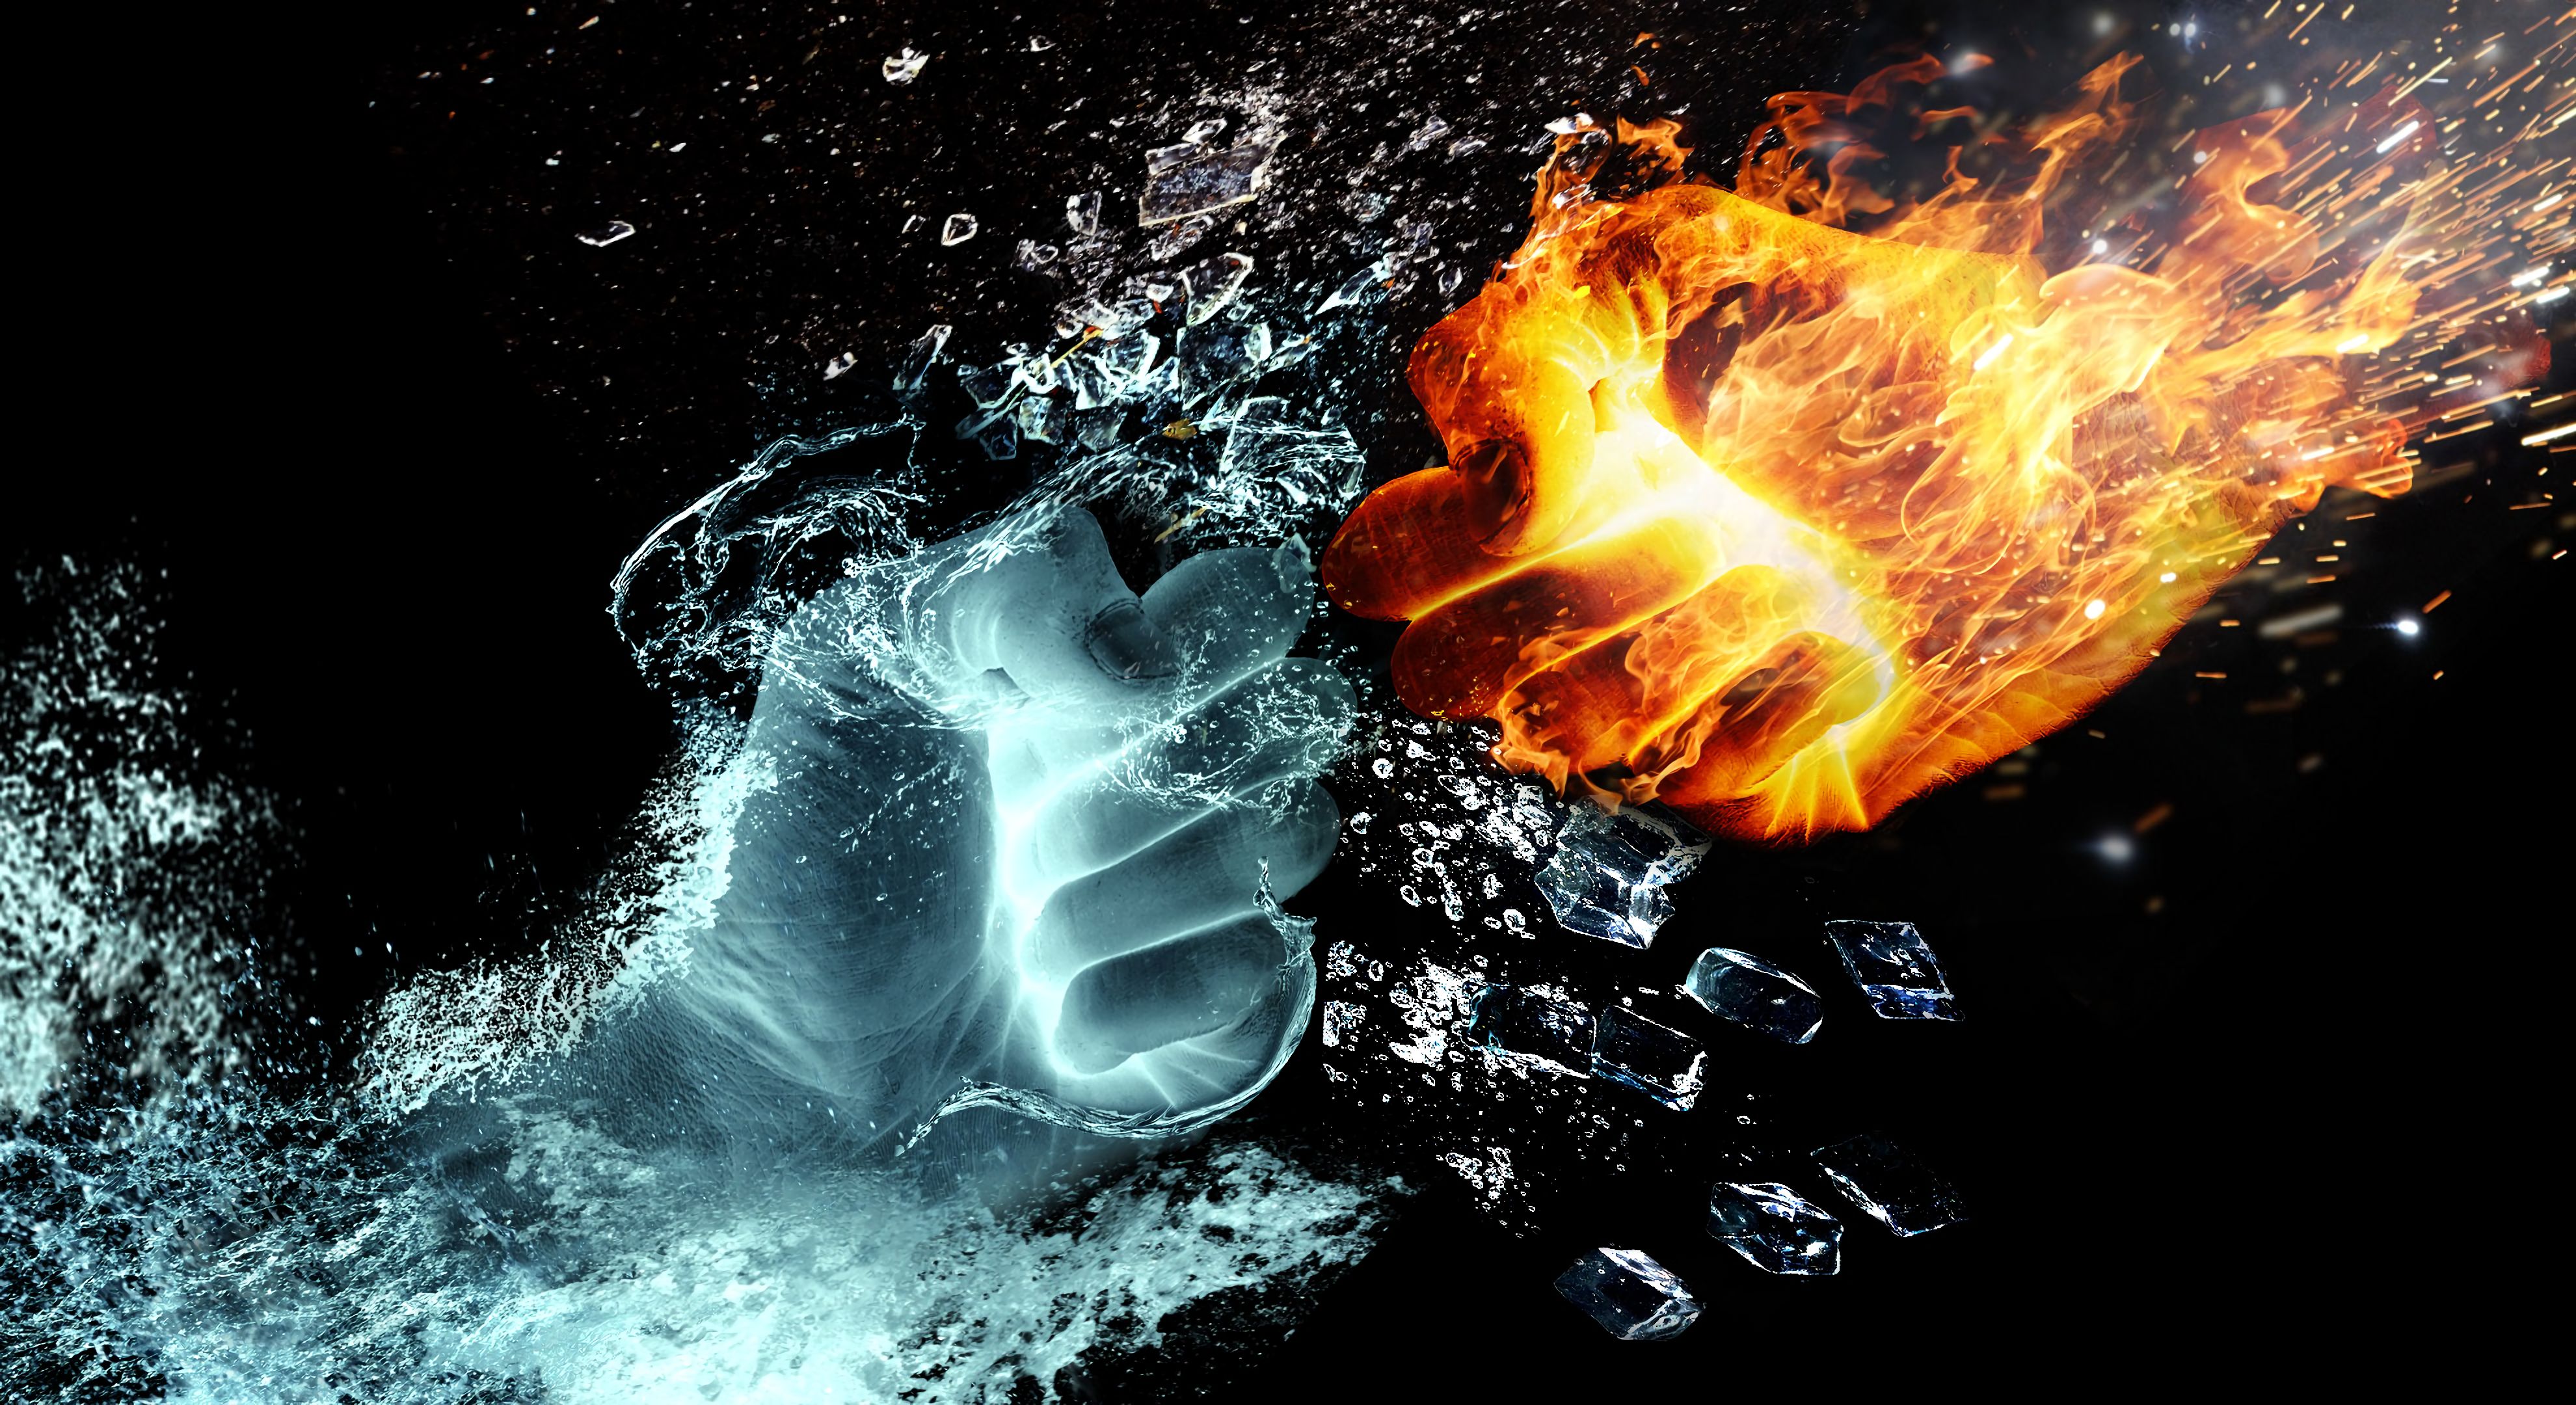 fire, water, miscellanea, miscellaneous, spray, hands, shards, smithereens